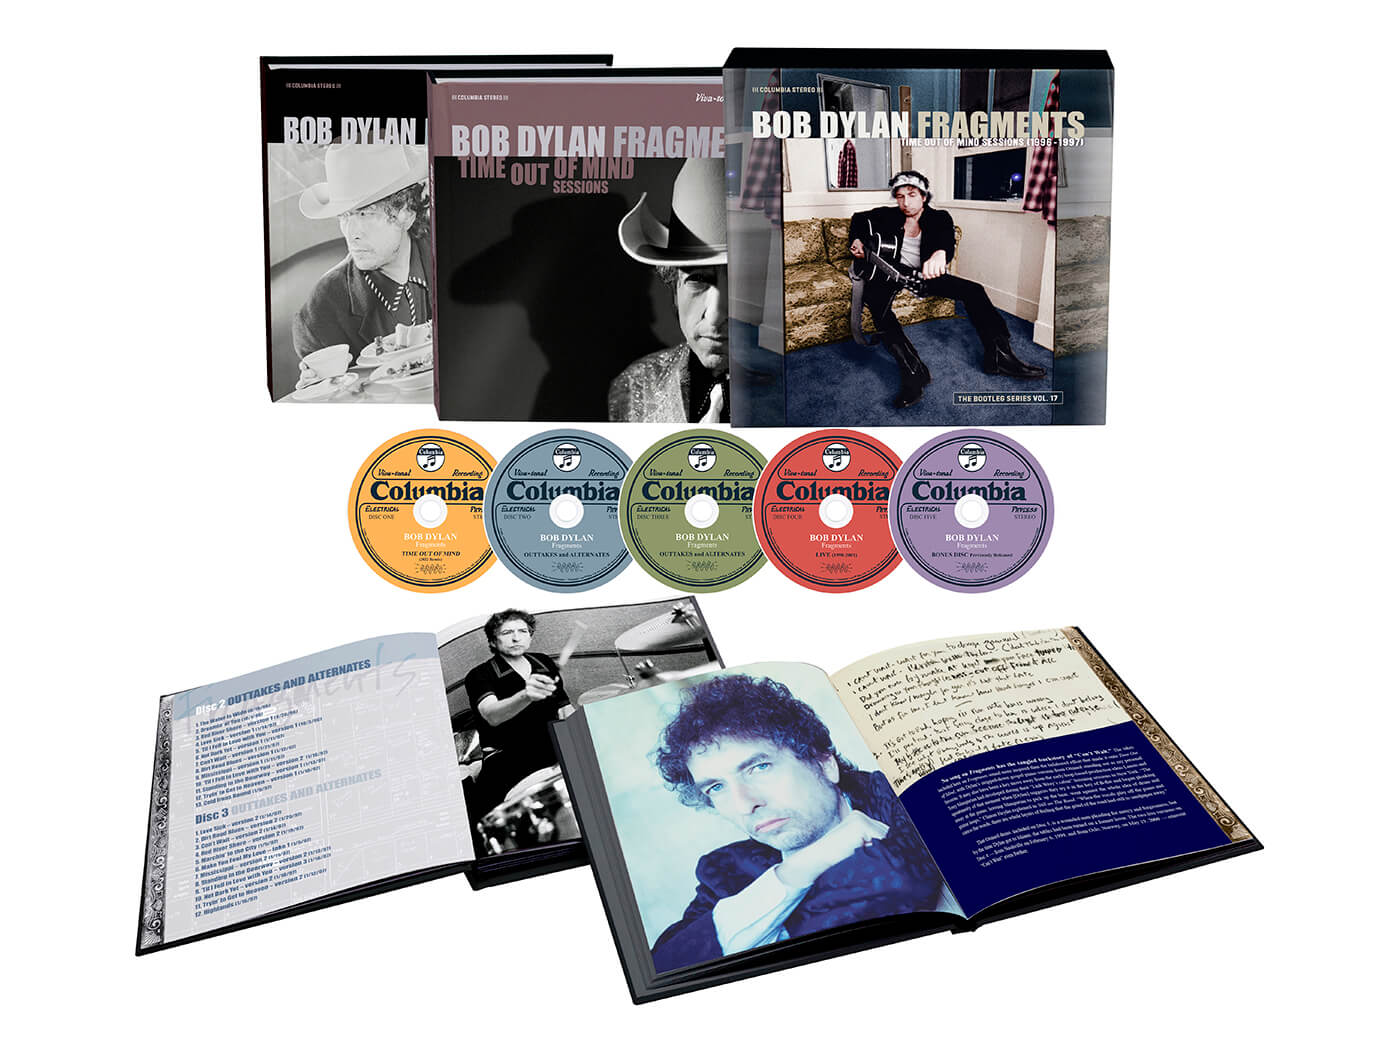 Bob Dylan announces Fragments – Time Out Of Mind Sessions (1996 – 1997): The Bootleg Series Vol. 17